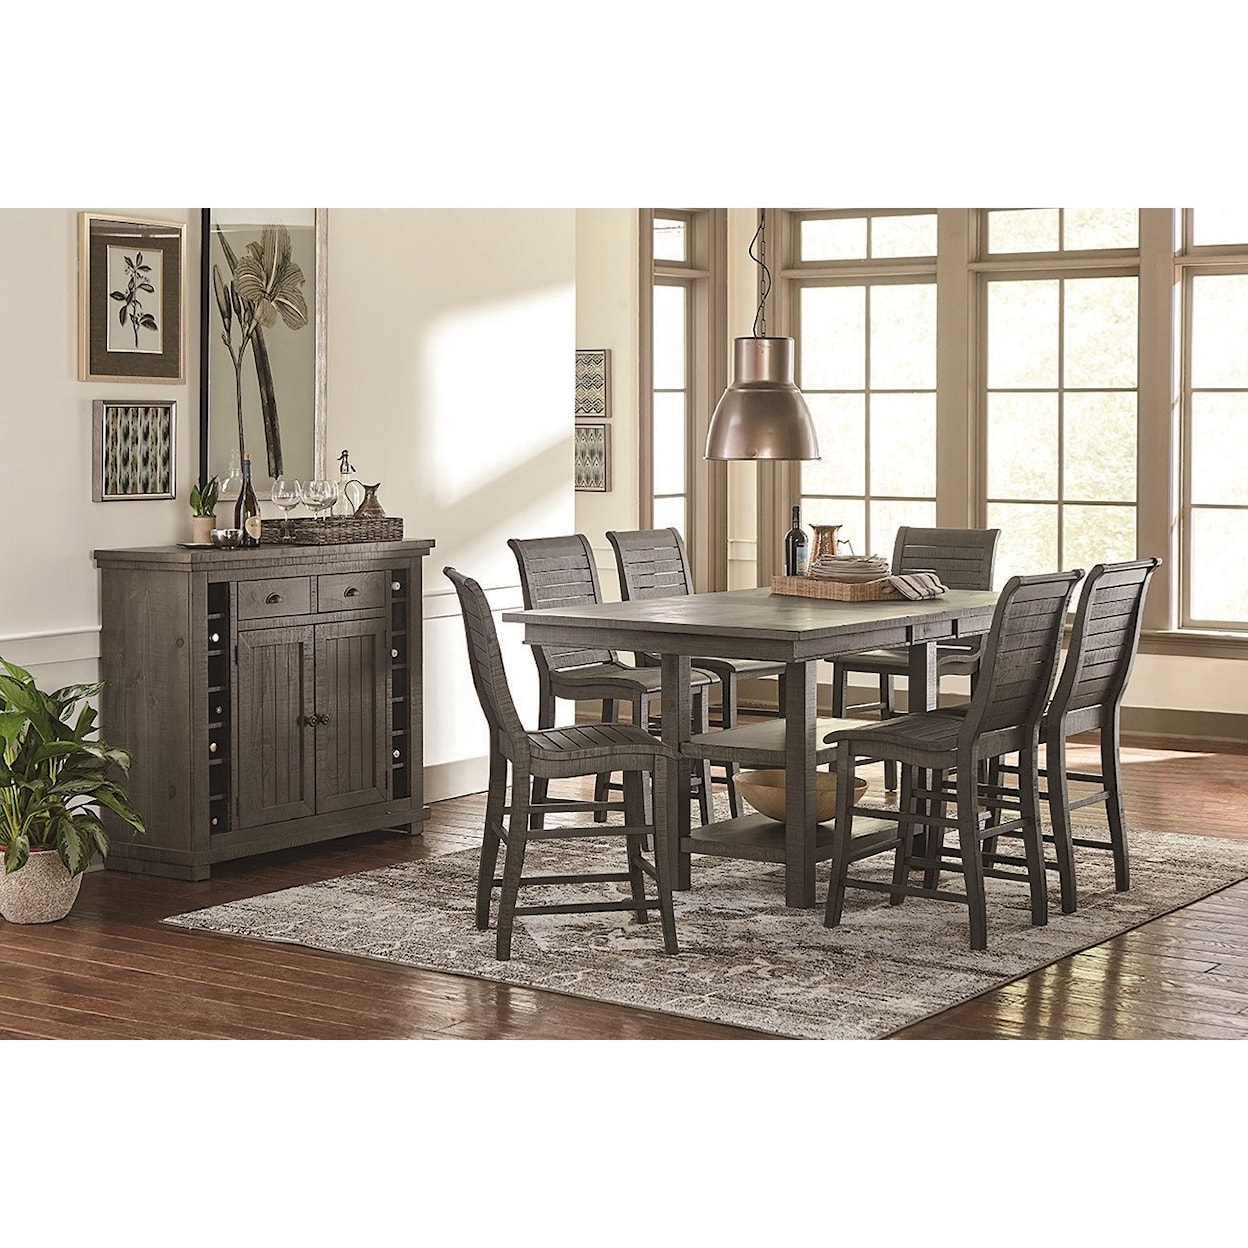 Progressive Furniture Willow Dining Formal Dining Room Group